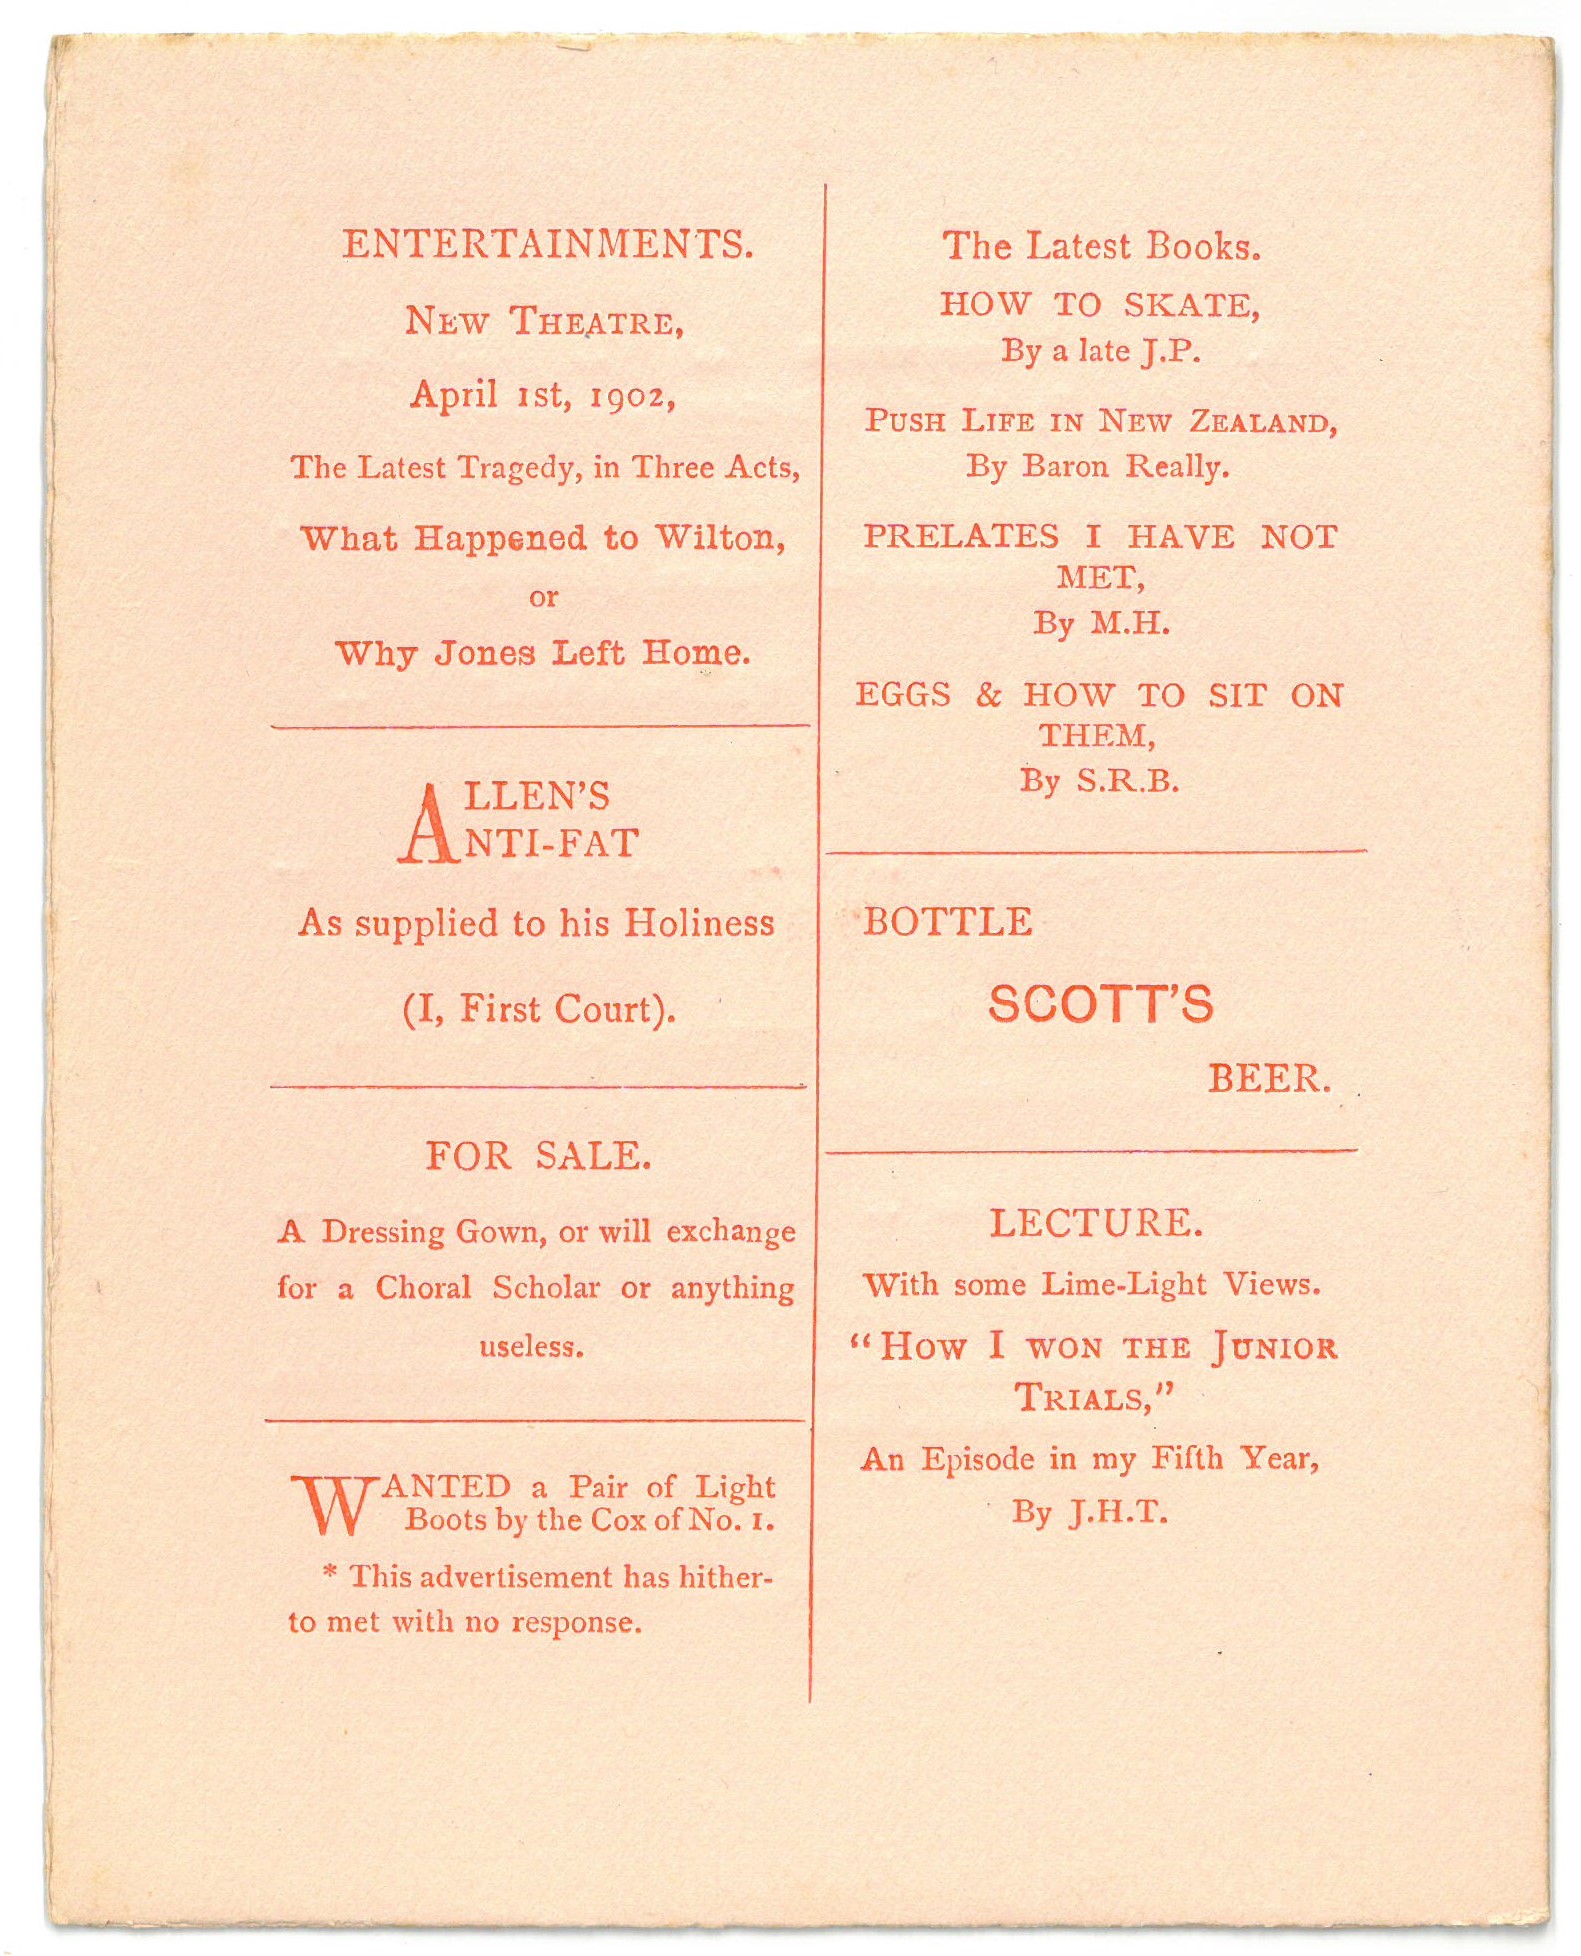 Back cover of concert programme, early 1900s